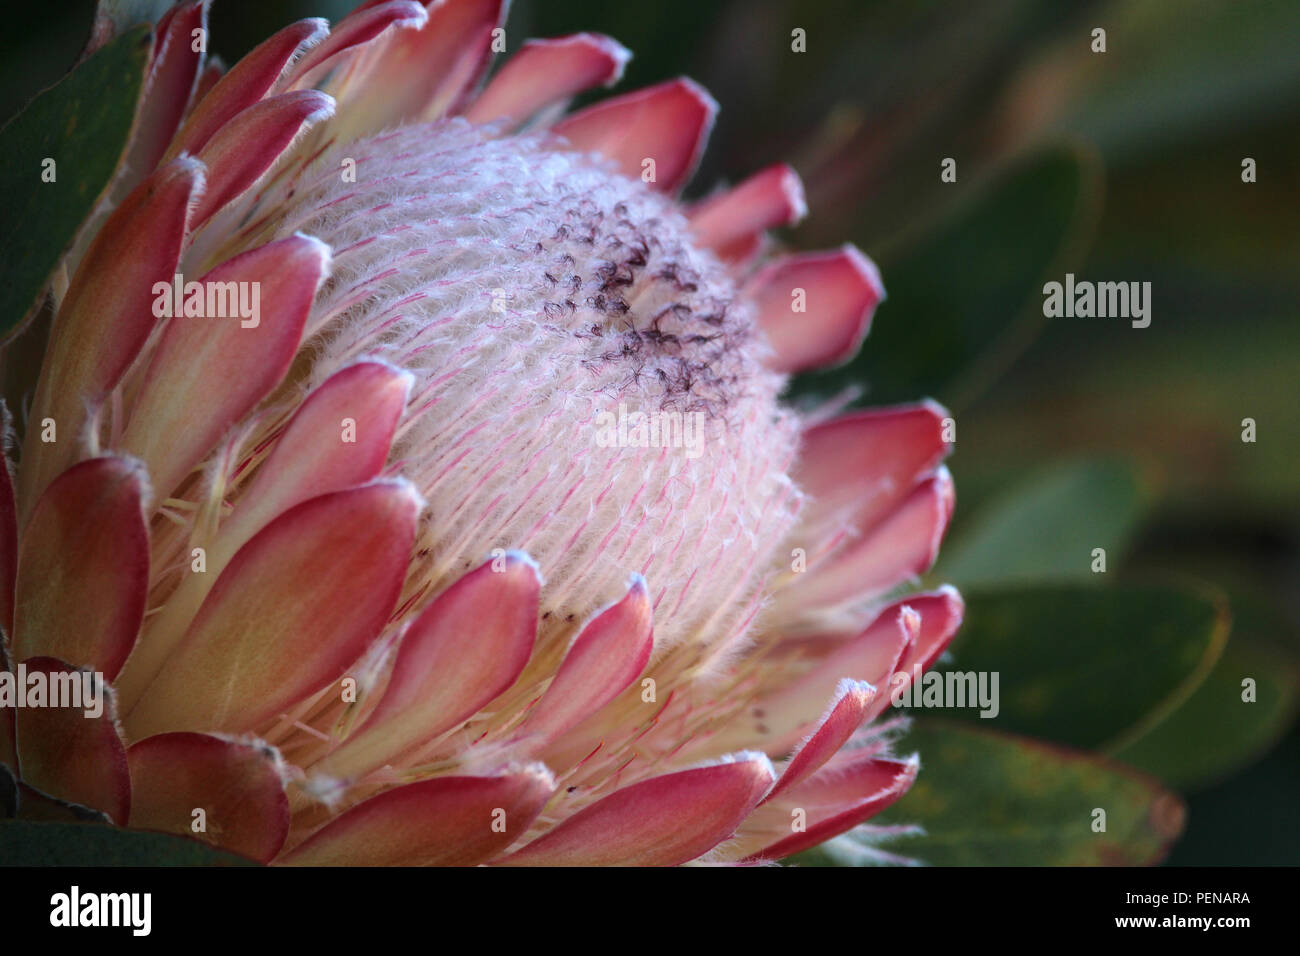 Macro of flowering Protea blossom, also known as sugarbush flower. Stock Photo